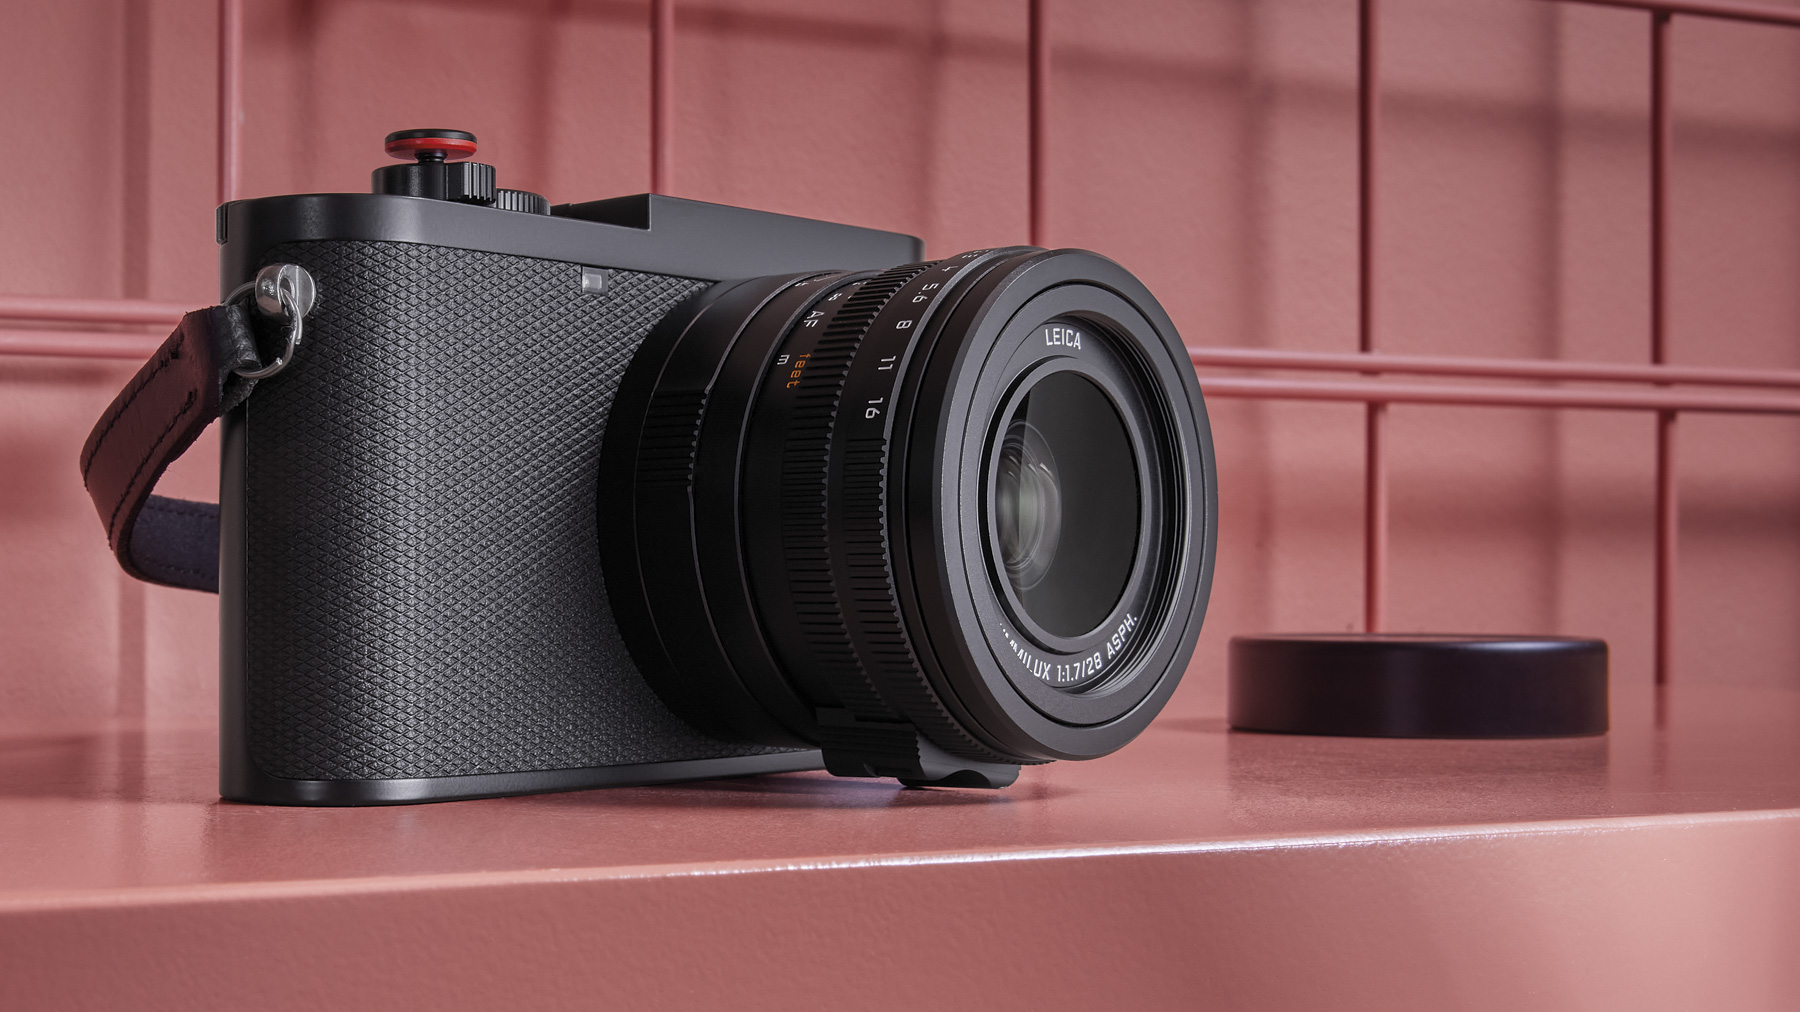 Leica Q3 for low angle with bright modern interior background